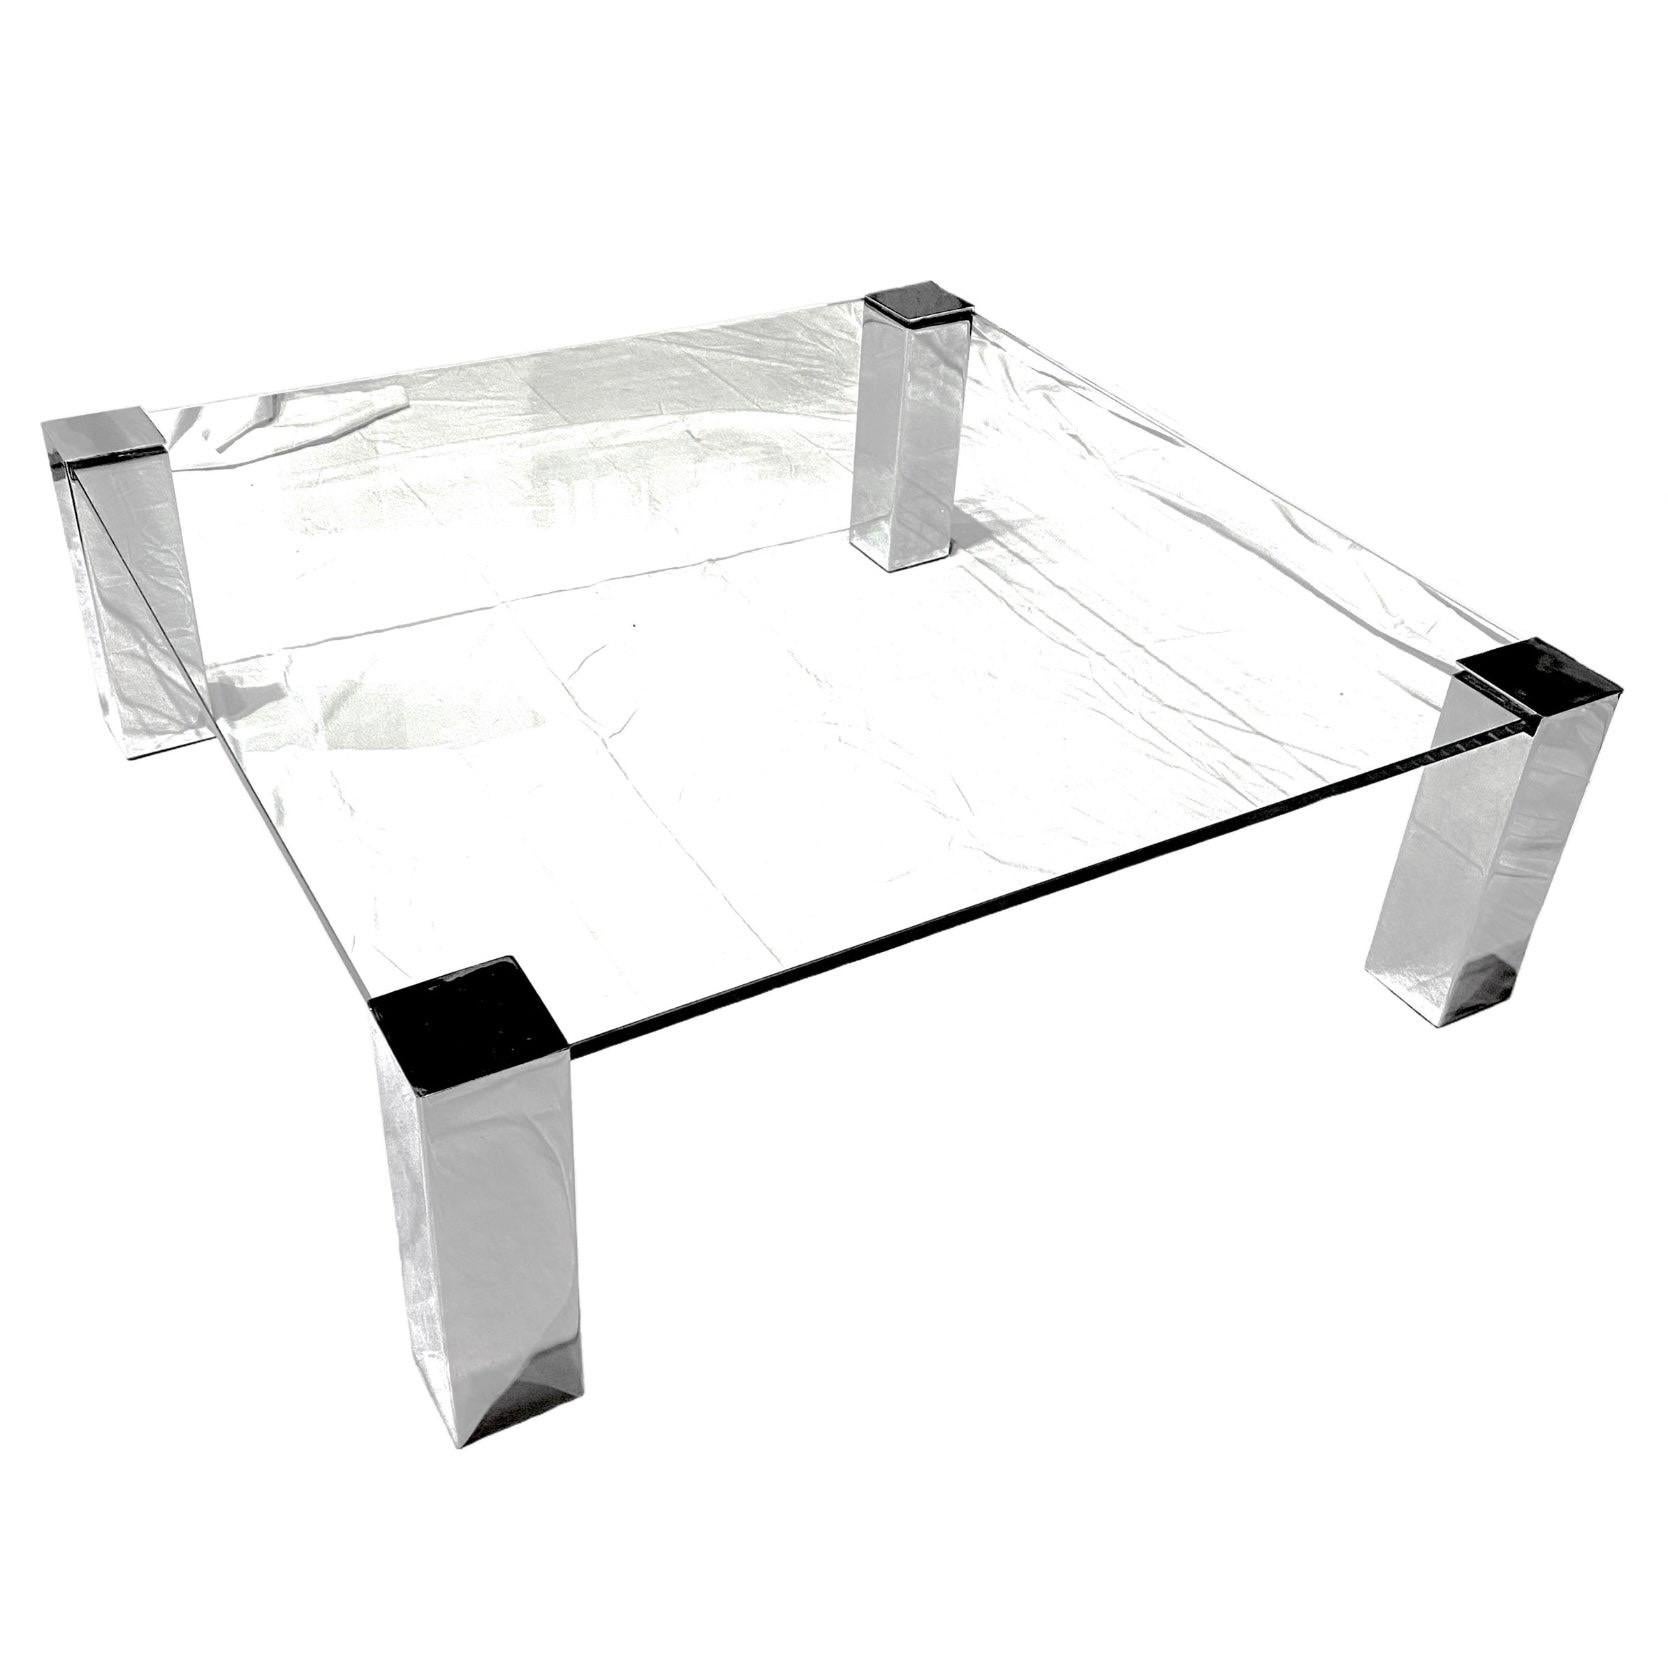 Designed by Willy Rizzo

Made in Italy

Chrome Leg Coffee Table

Glass Top

Measurements:

 Height: 14